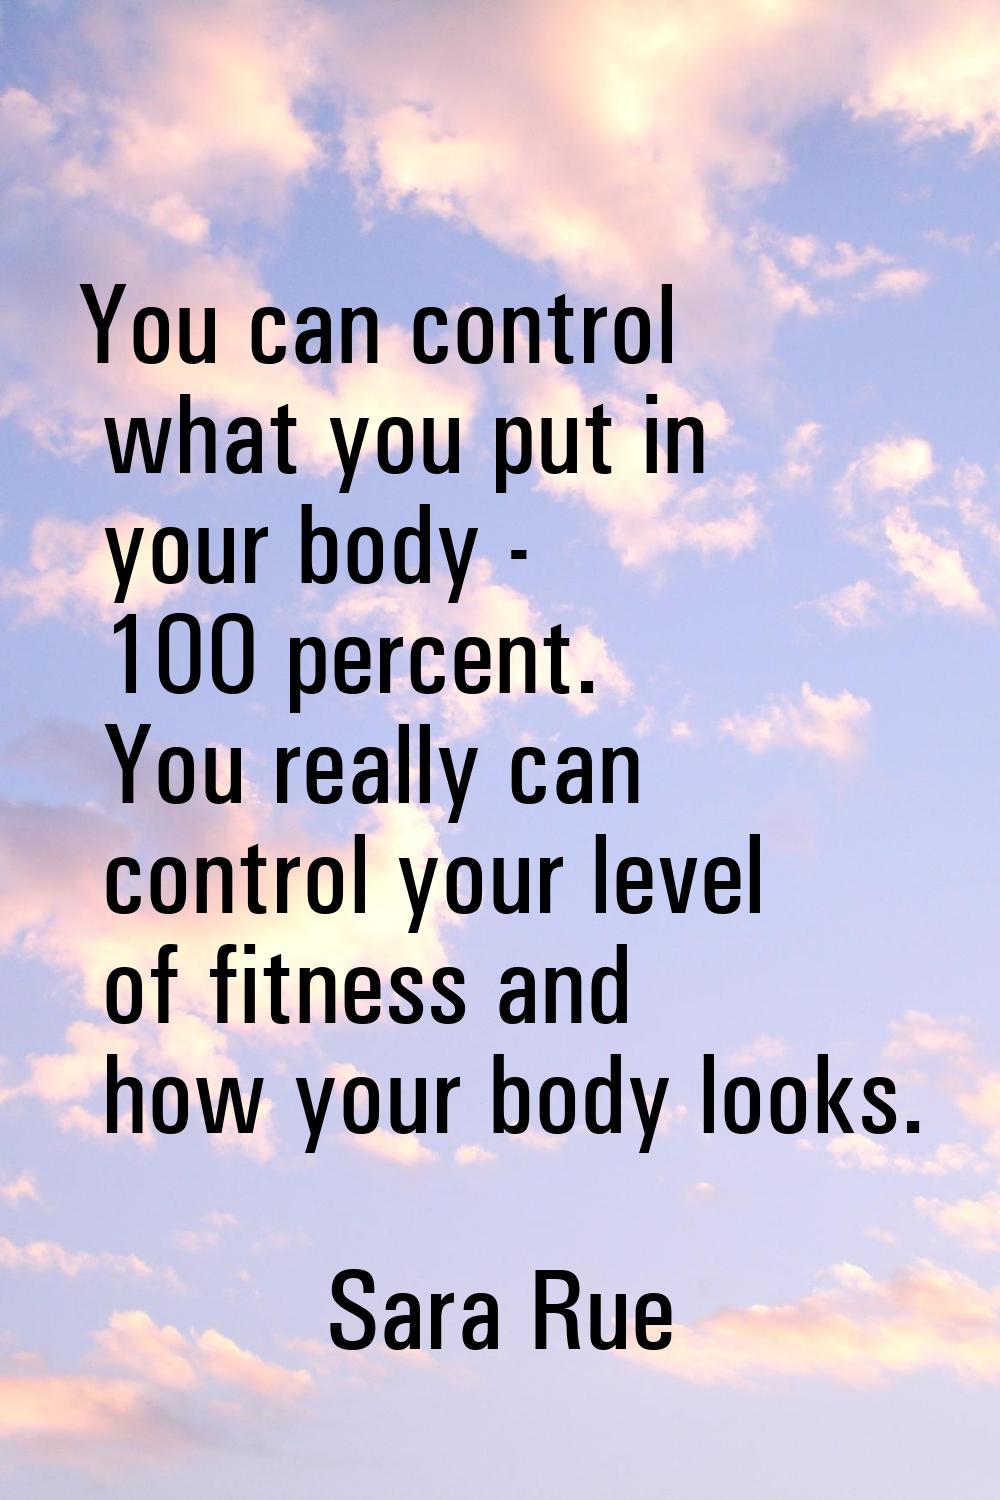 You can control what you put in your body - 100 percent. You really can control your level of fitne